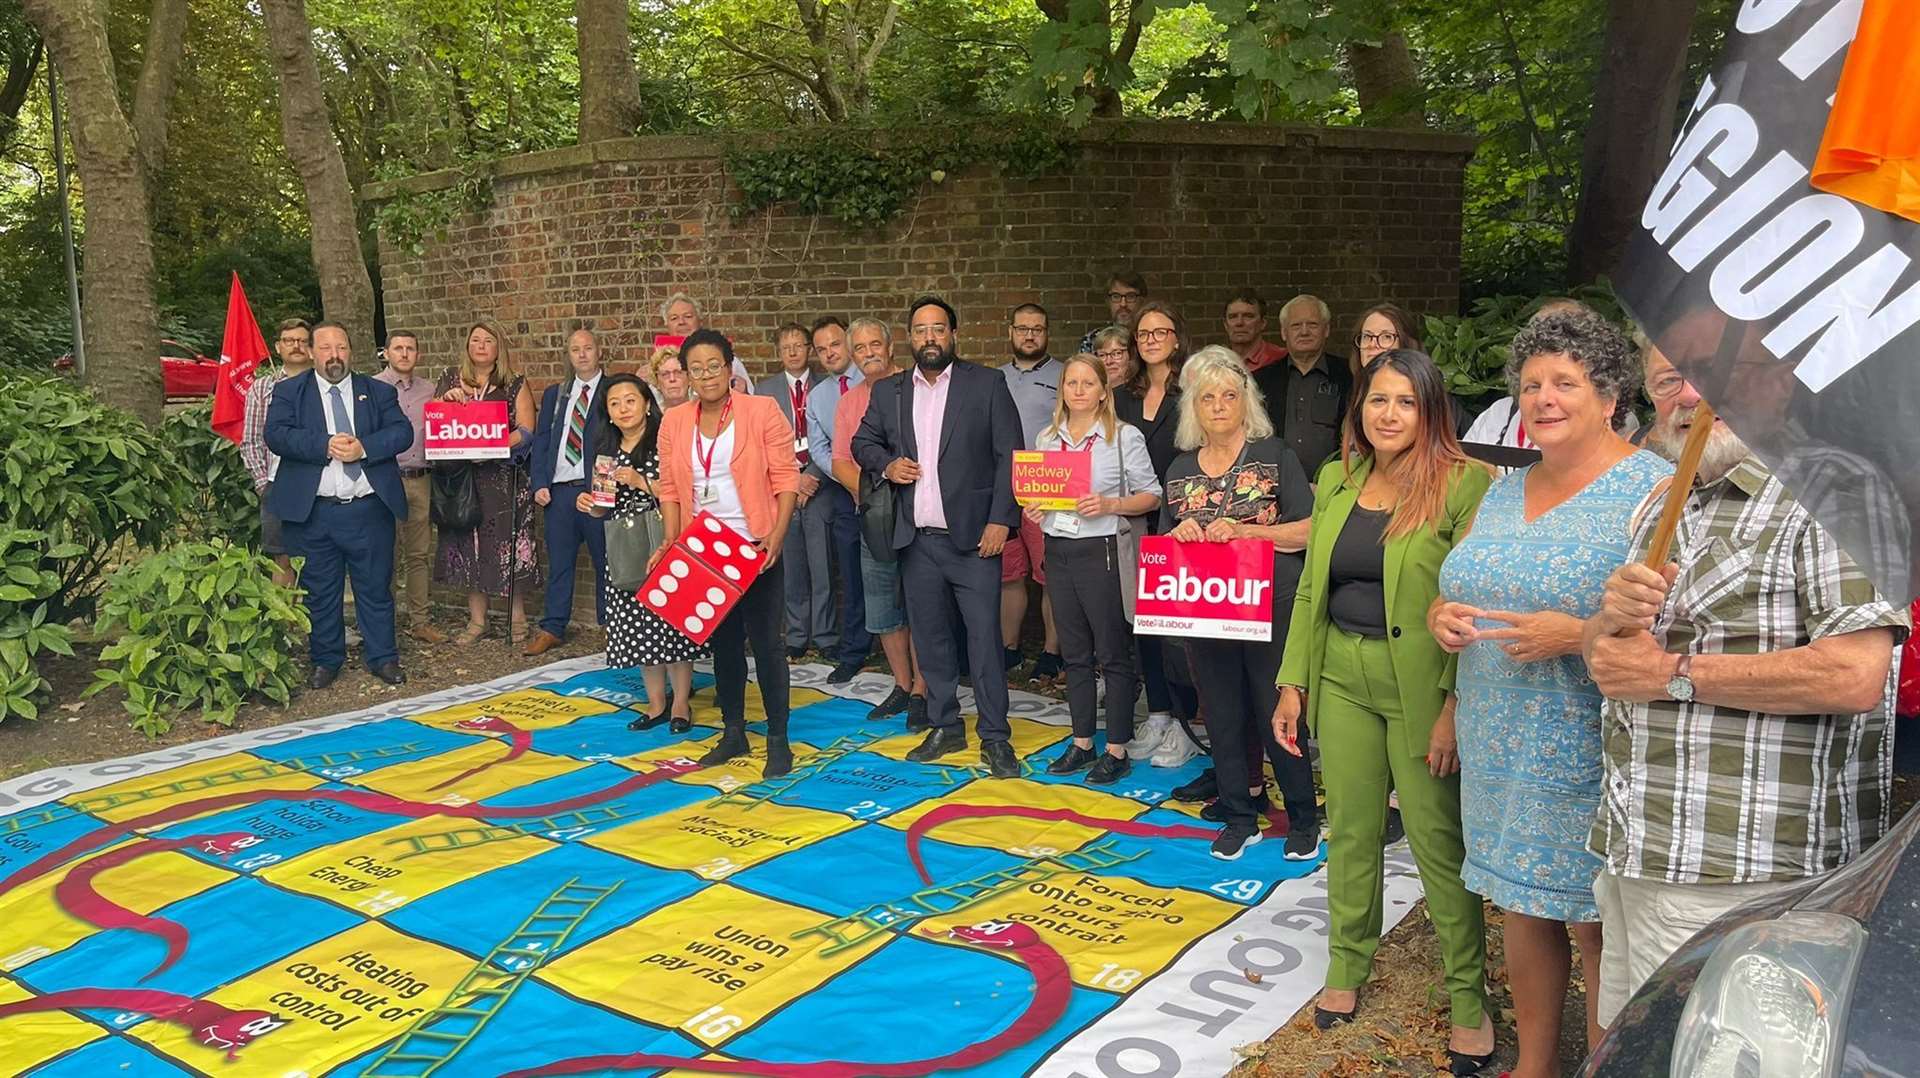 Medway Labour Group's cost of living rally in July 2022